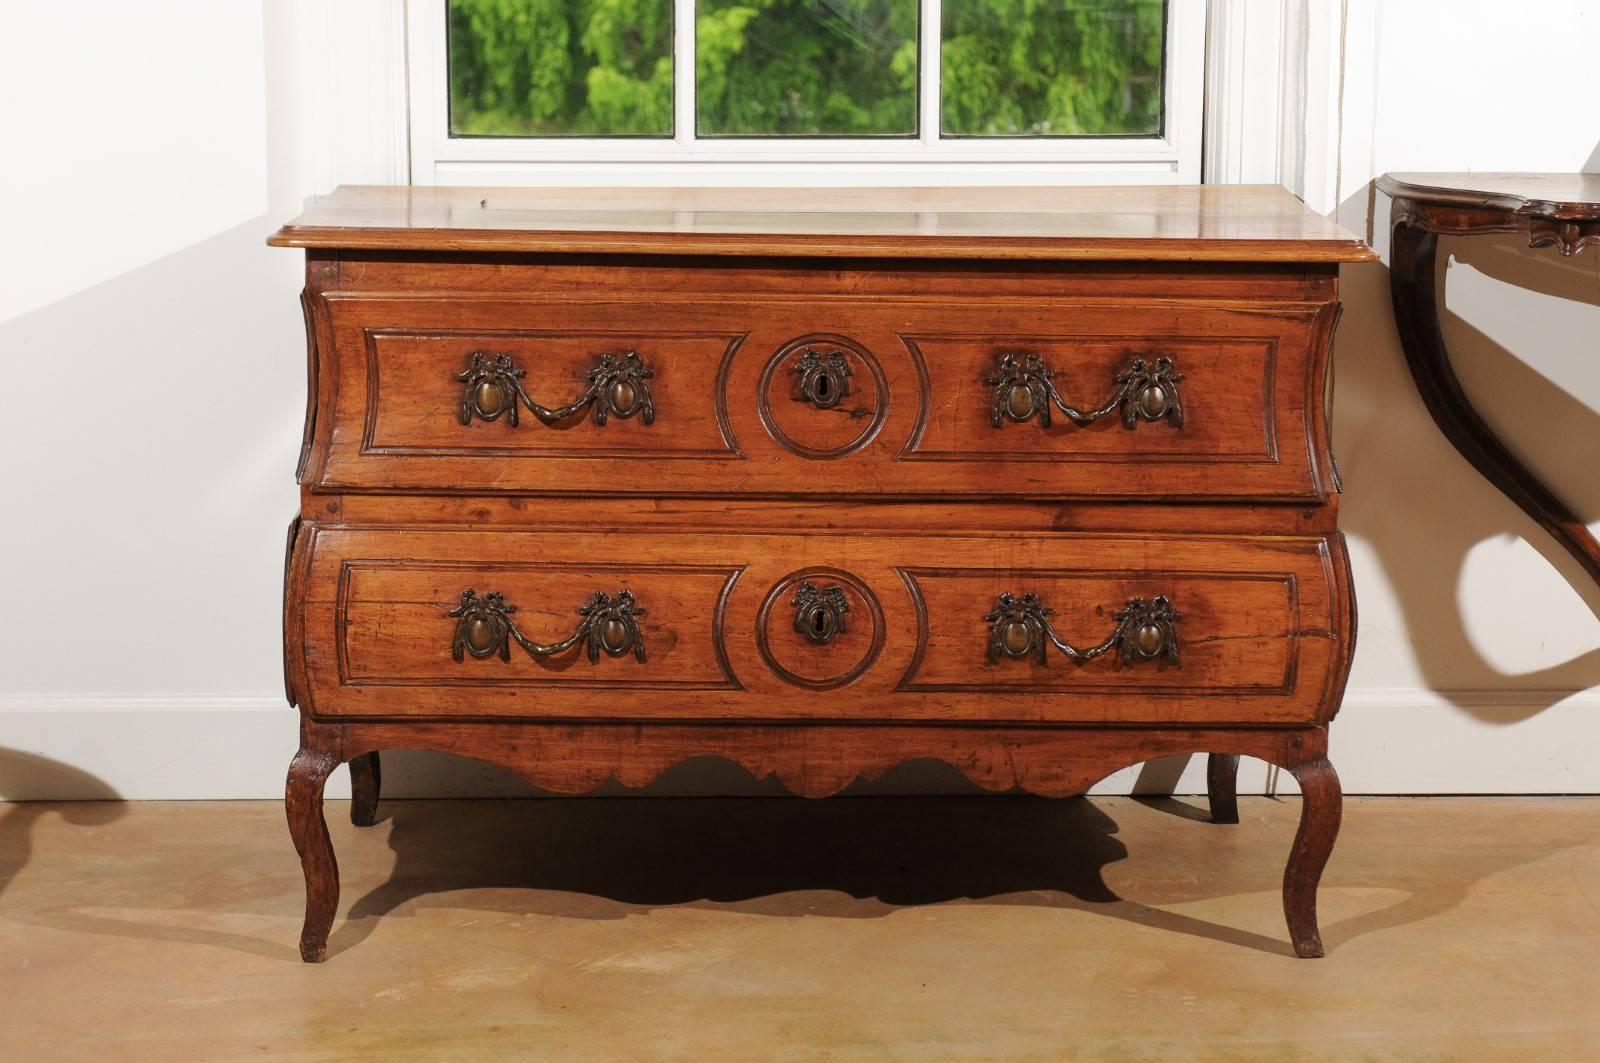 A French period Louis XV walnut two-drawer commode from the first half of the 18th century. Born in the early years of the reign of King Louis XV, This French walnut commode features a slightly raised rectangular top with rounded corners and